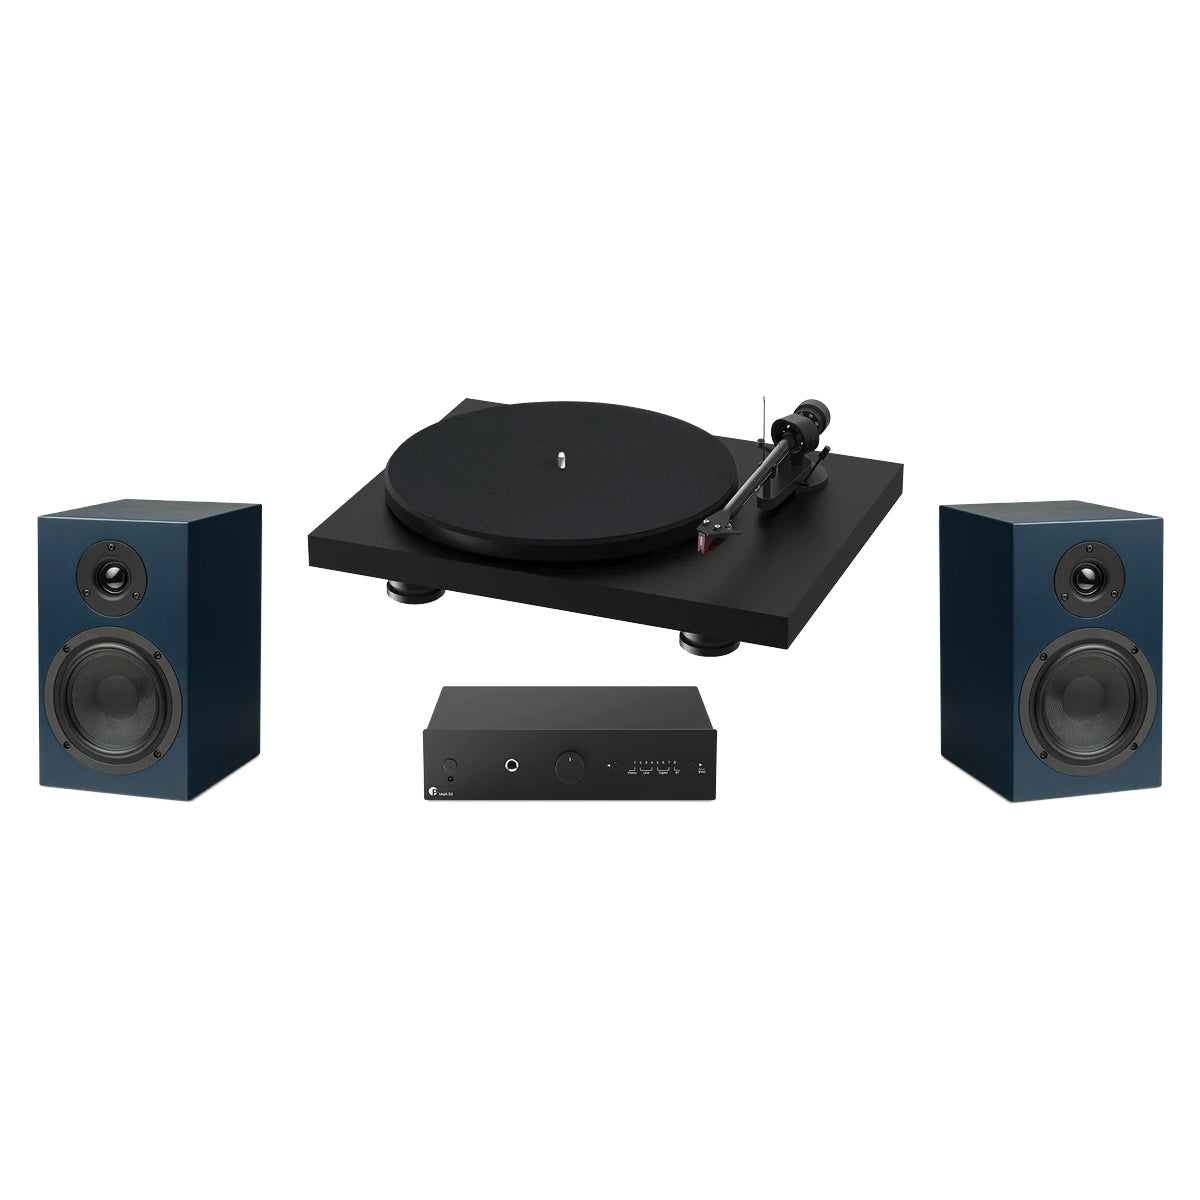 Pro-Ject Colorful Audio System - Black TT/Blue Speakers - The Audio Experts